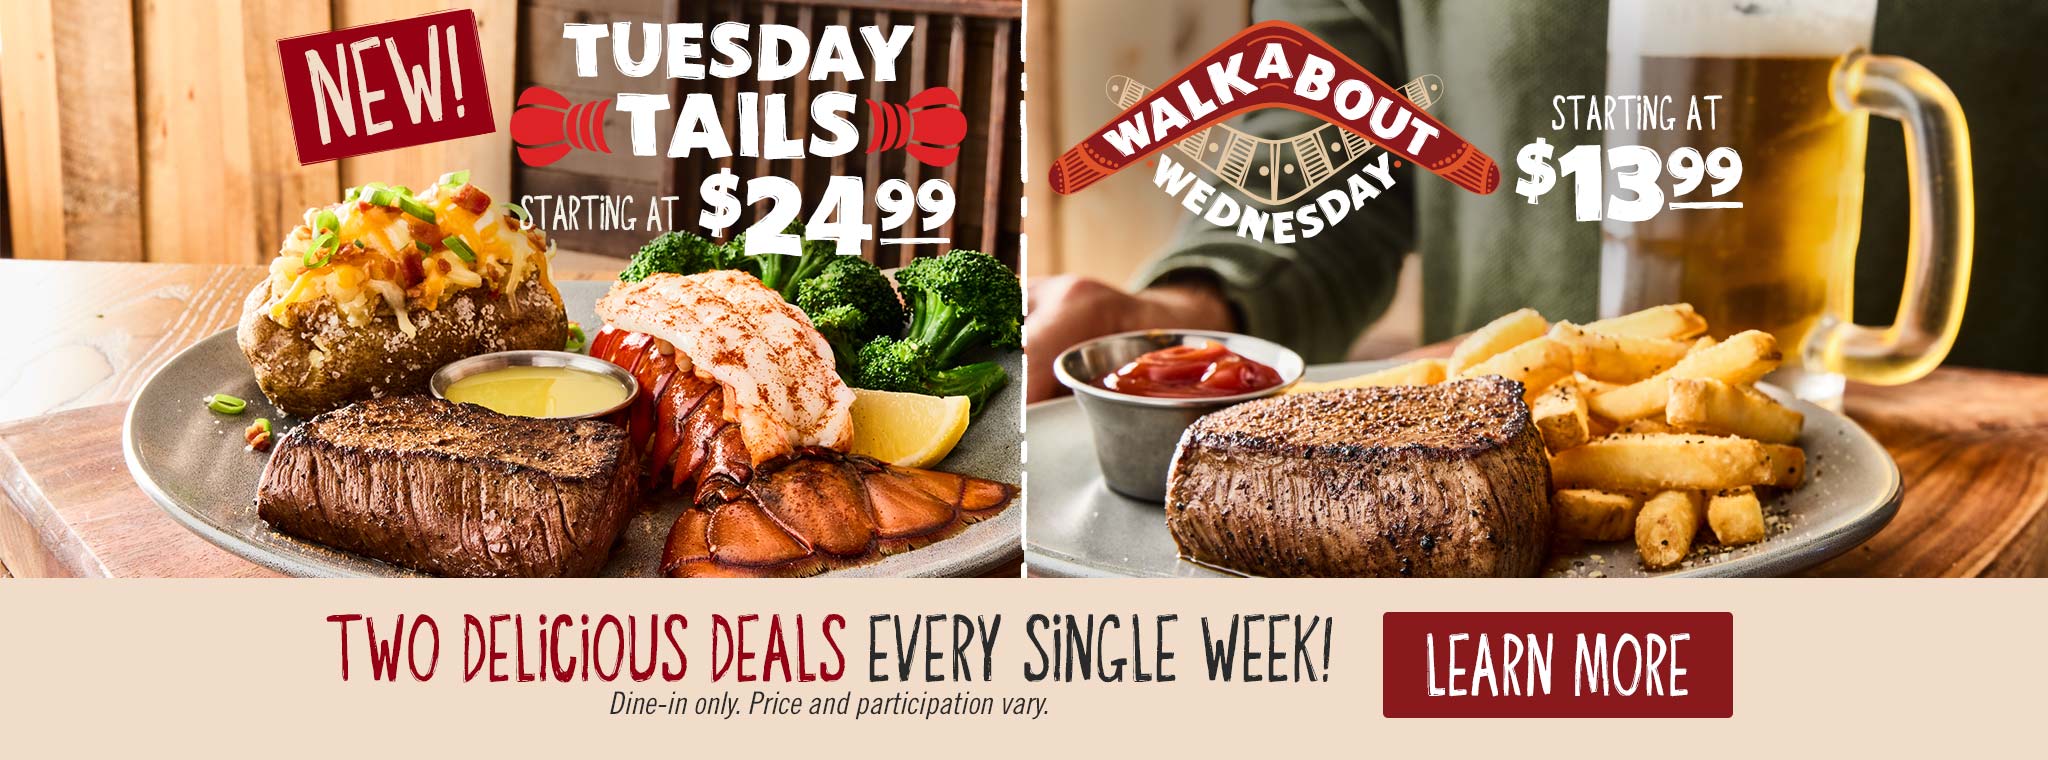 Tuesday Tails Starting At $24.99. WalkAbout Wednesday Starting at $13.99.Two Delicious Deals Every Single Week. LEARN MORE